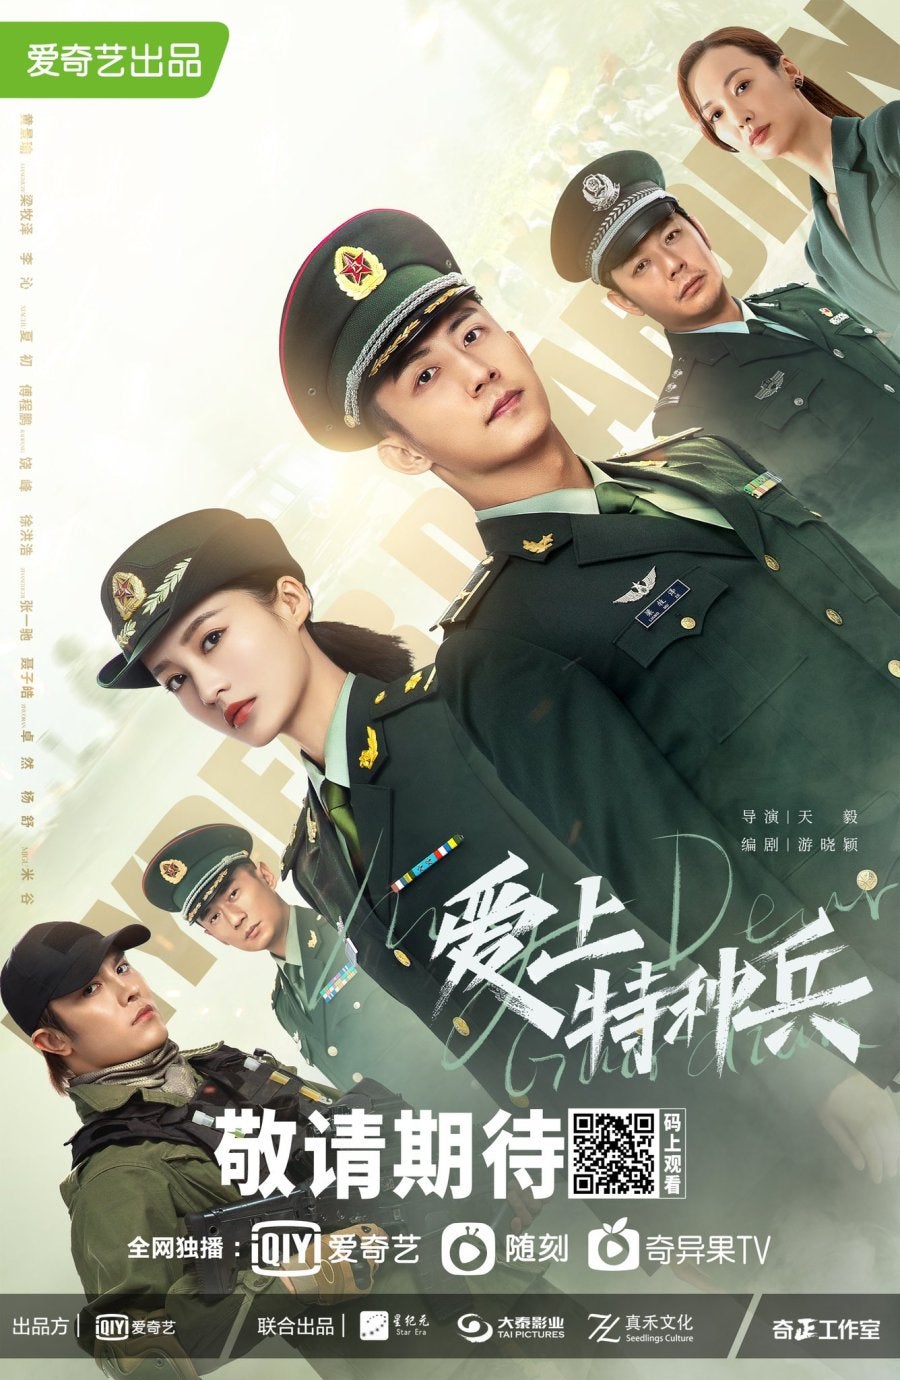 TV ratings for My Dear Guardian (亲爱的戎装) in Canada. iqiyi TV series